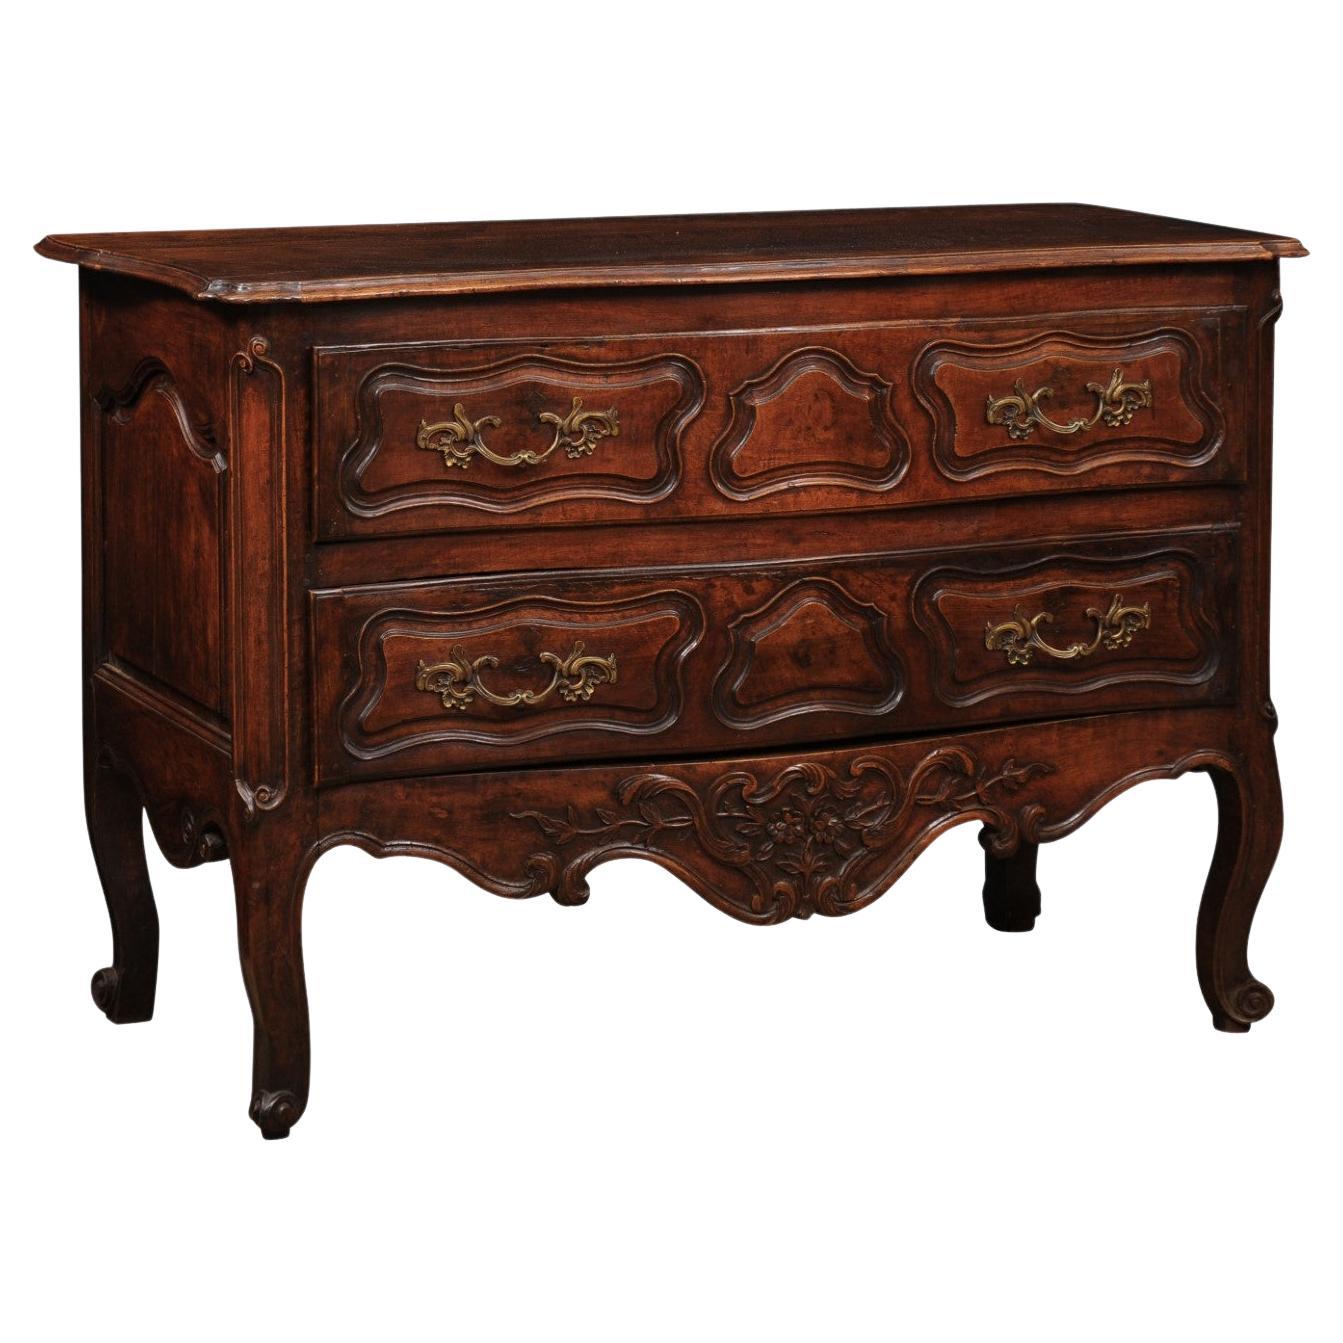  French Mid 18th Century Louis XV Walnut Commode with 2 Drawers